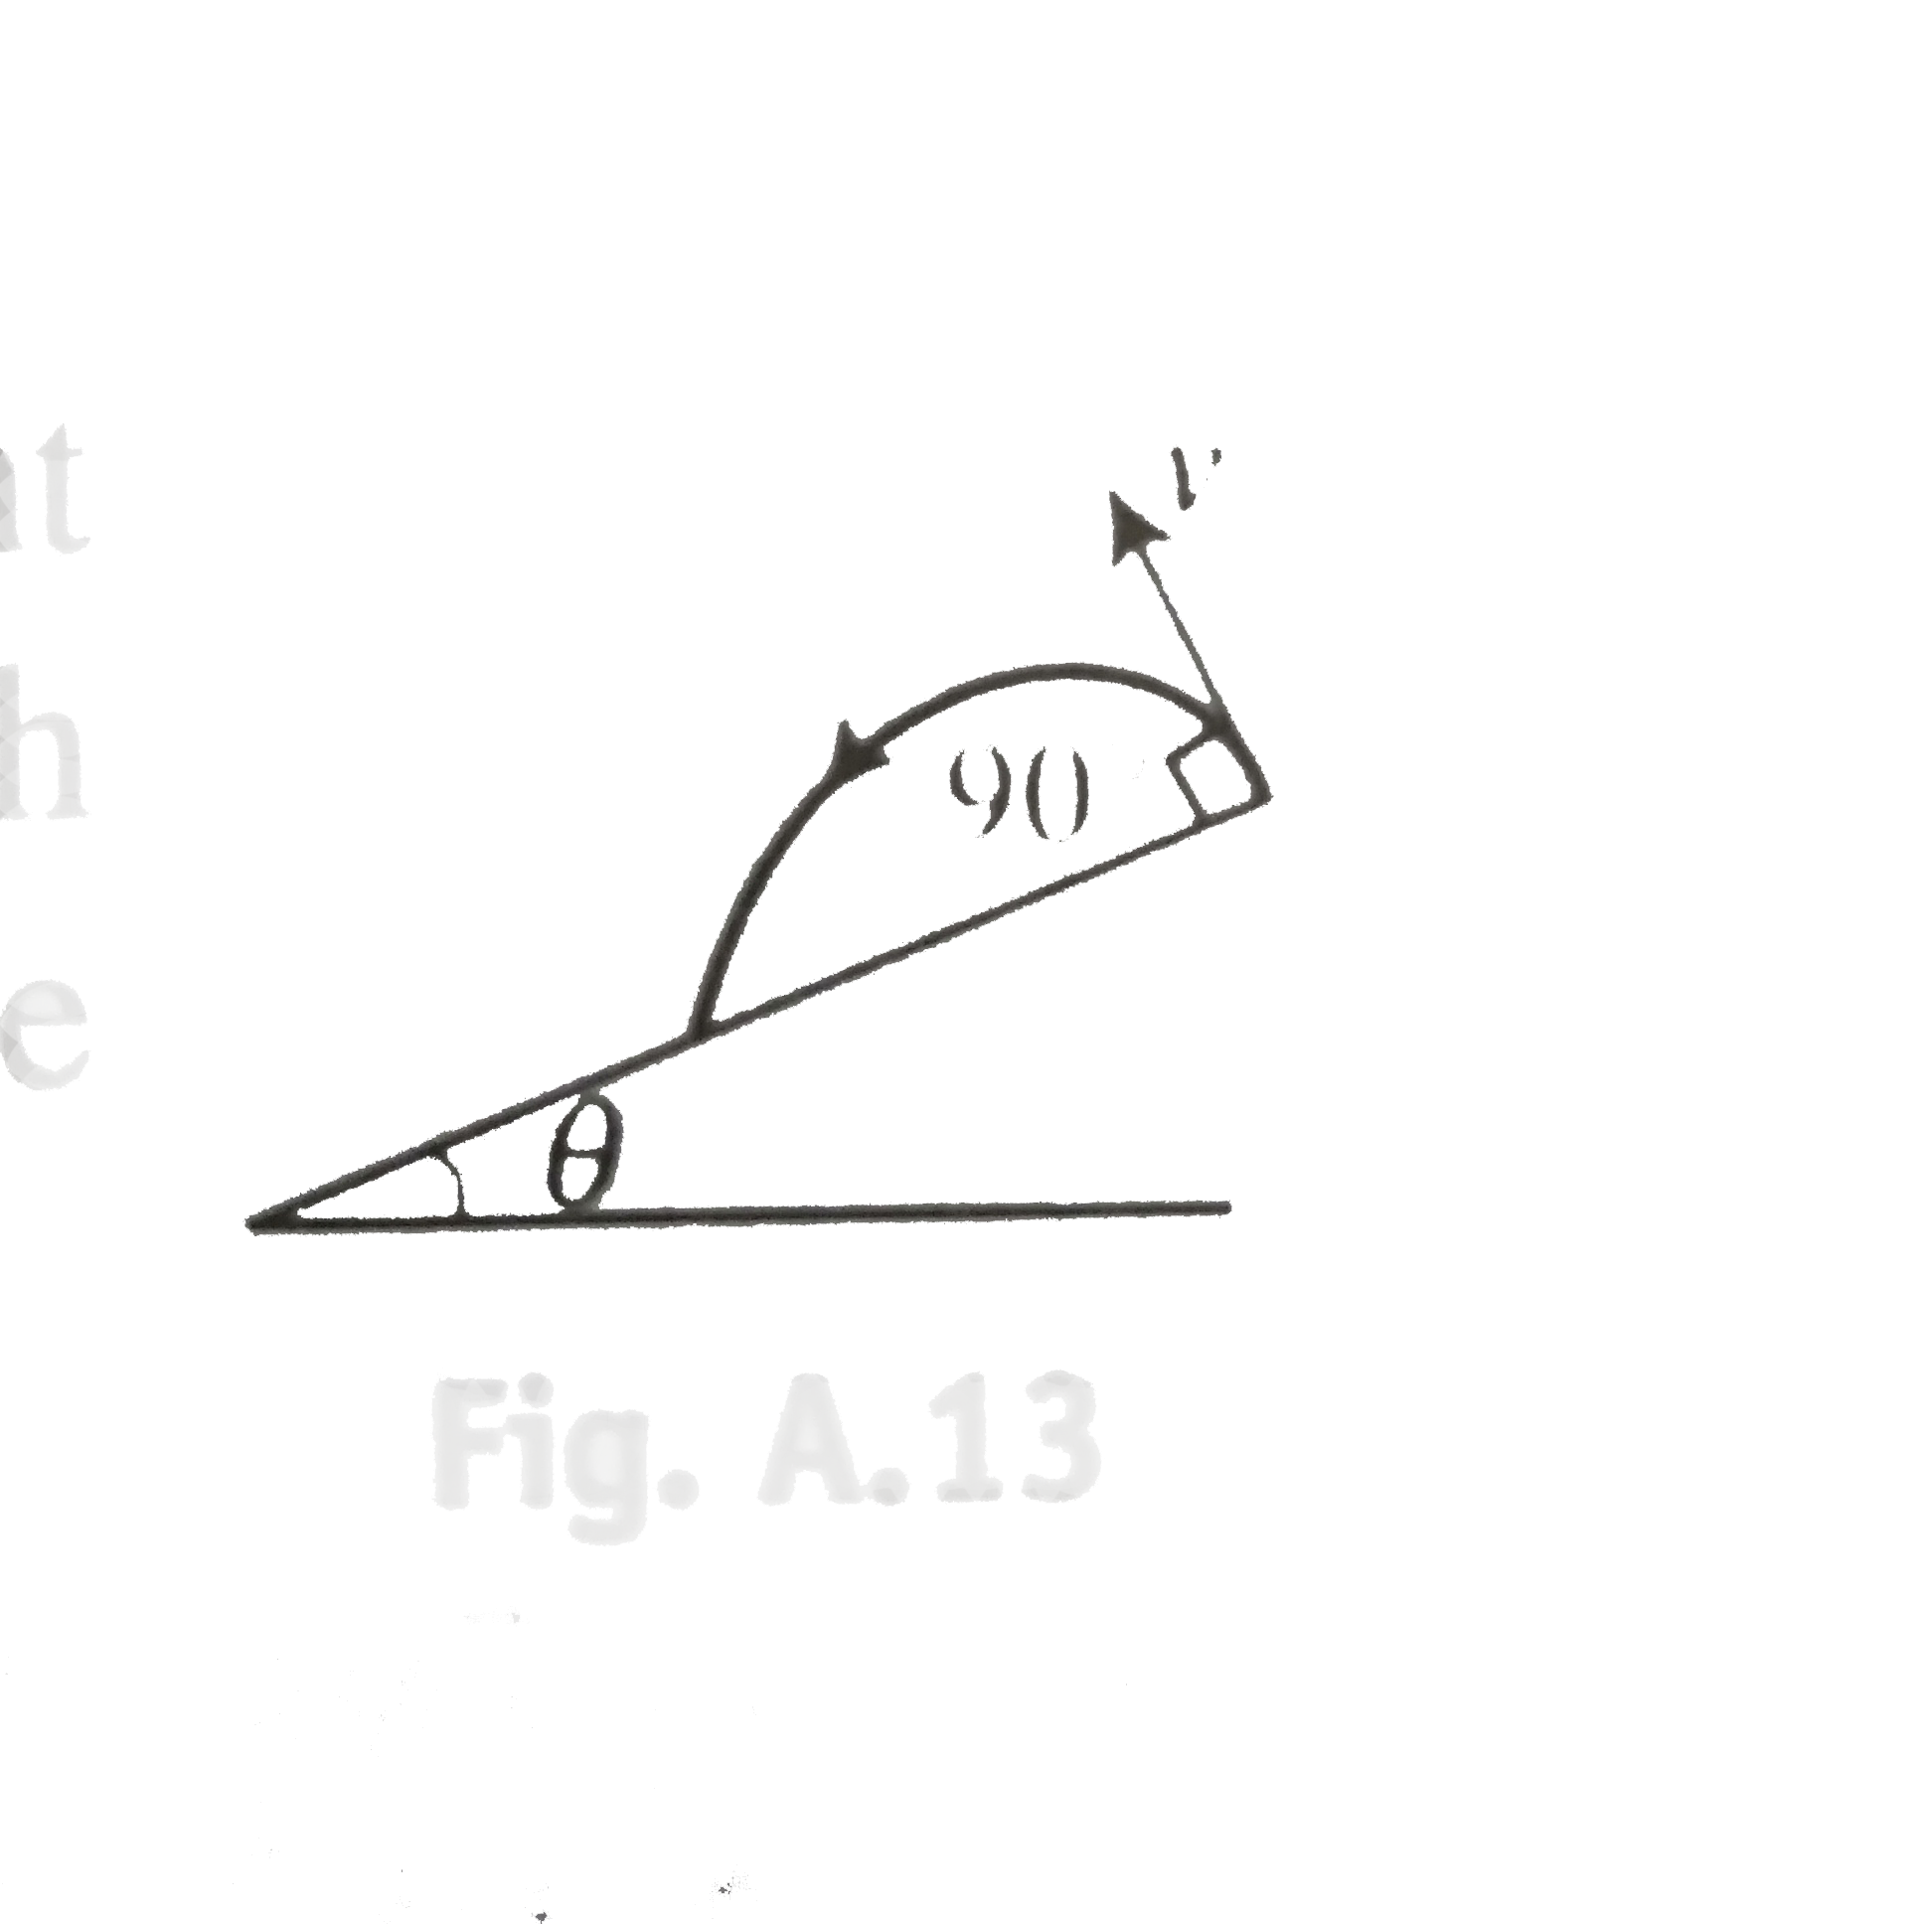 A projectile is fired with a velocity v at right angle to the slope inclined at an angle theta with the horizontal. The range of the projectile along the inclined plane is